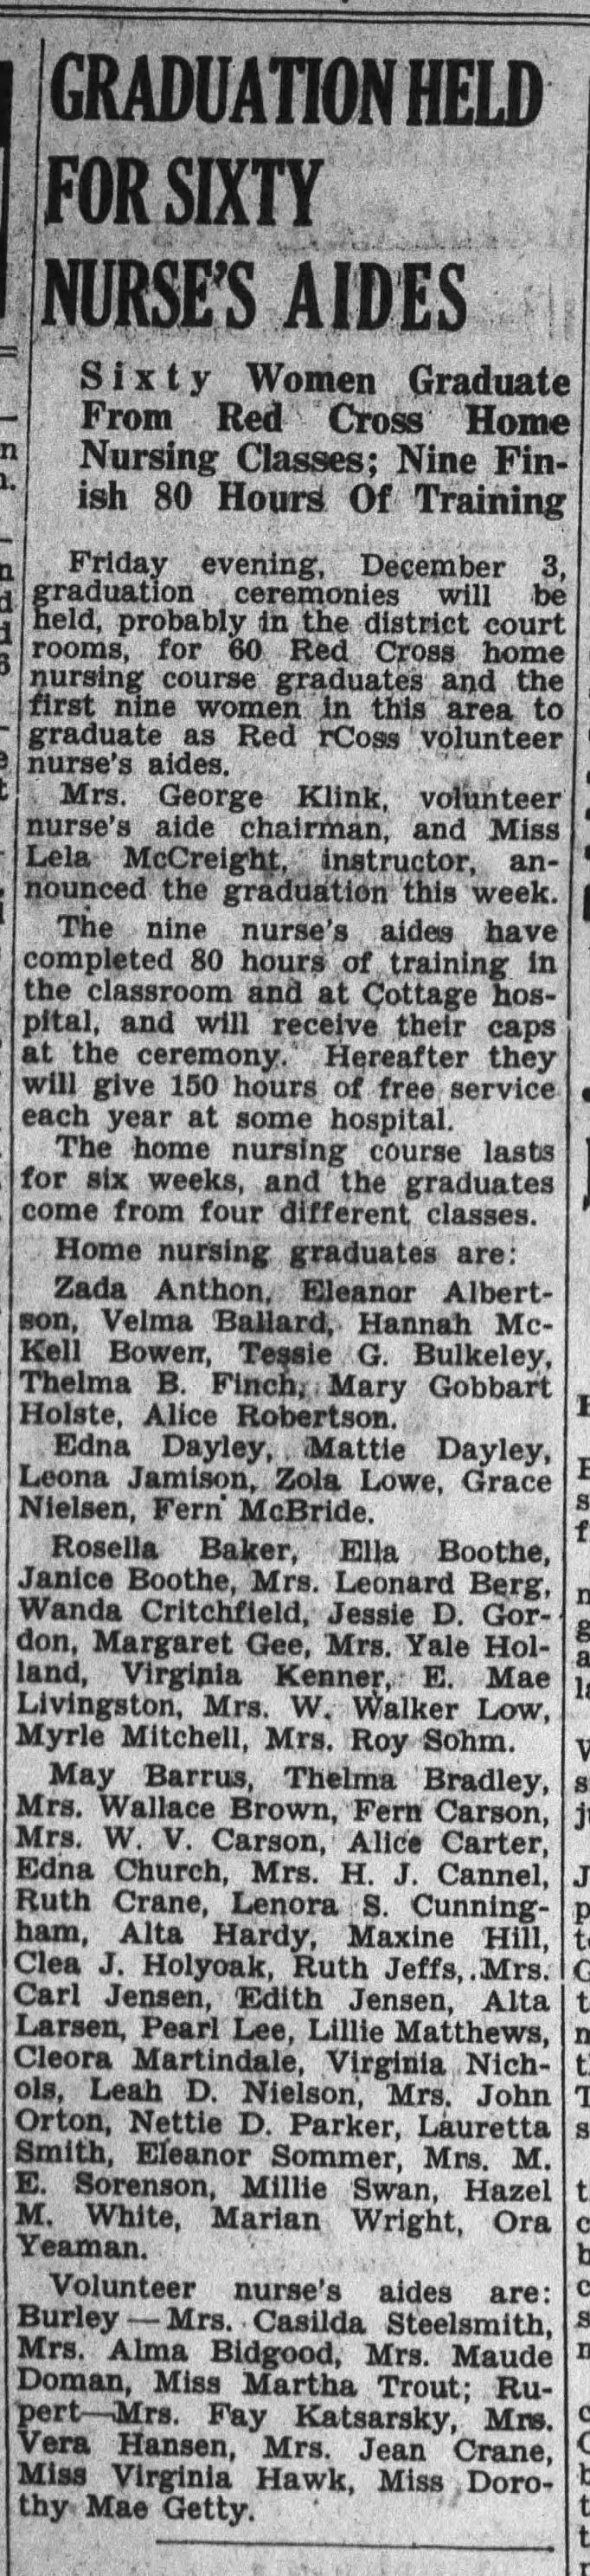 Zada Anthon graduates from Red Cross Home Nursing Classes 1943